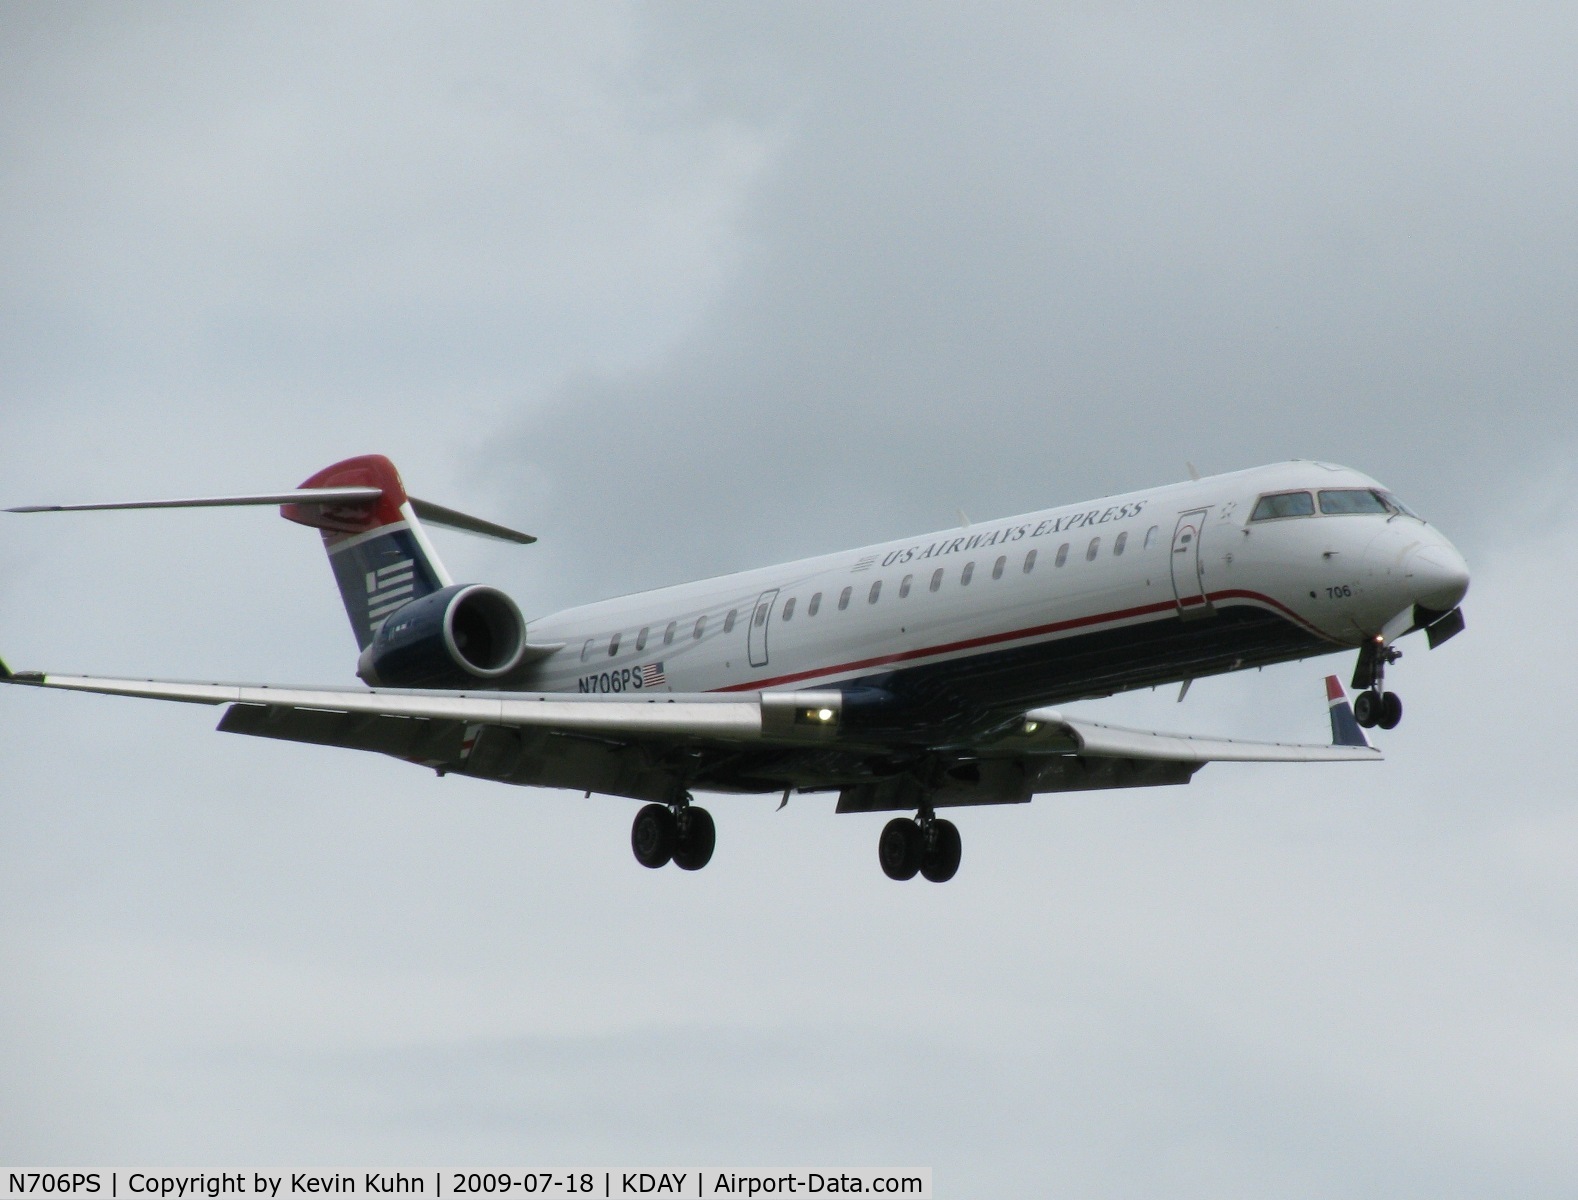 N706PS, 2004 Bombardier CRJ-701 (CL-600-2C10) Regional Jet C/N 10150, Normal traffic keeps on plugging even as the airshow goes on (CRJ-700)